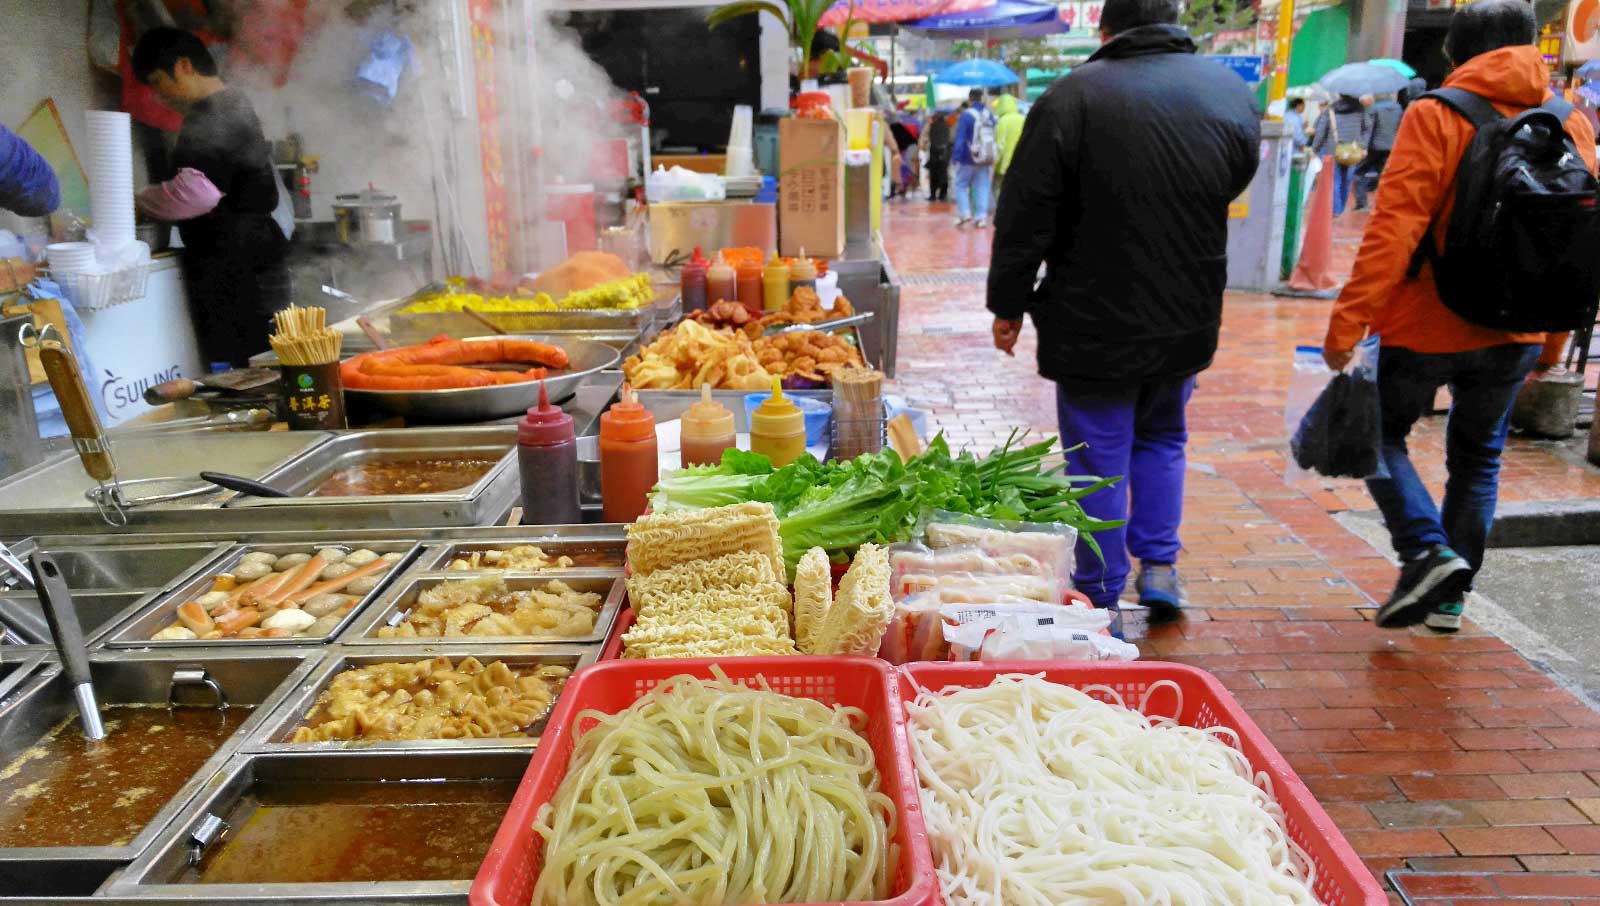 STREET FOOD. Old school noodles on the street that sells the latest gadgets.